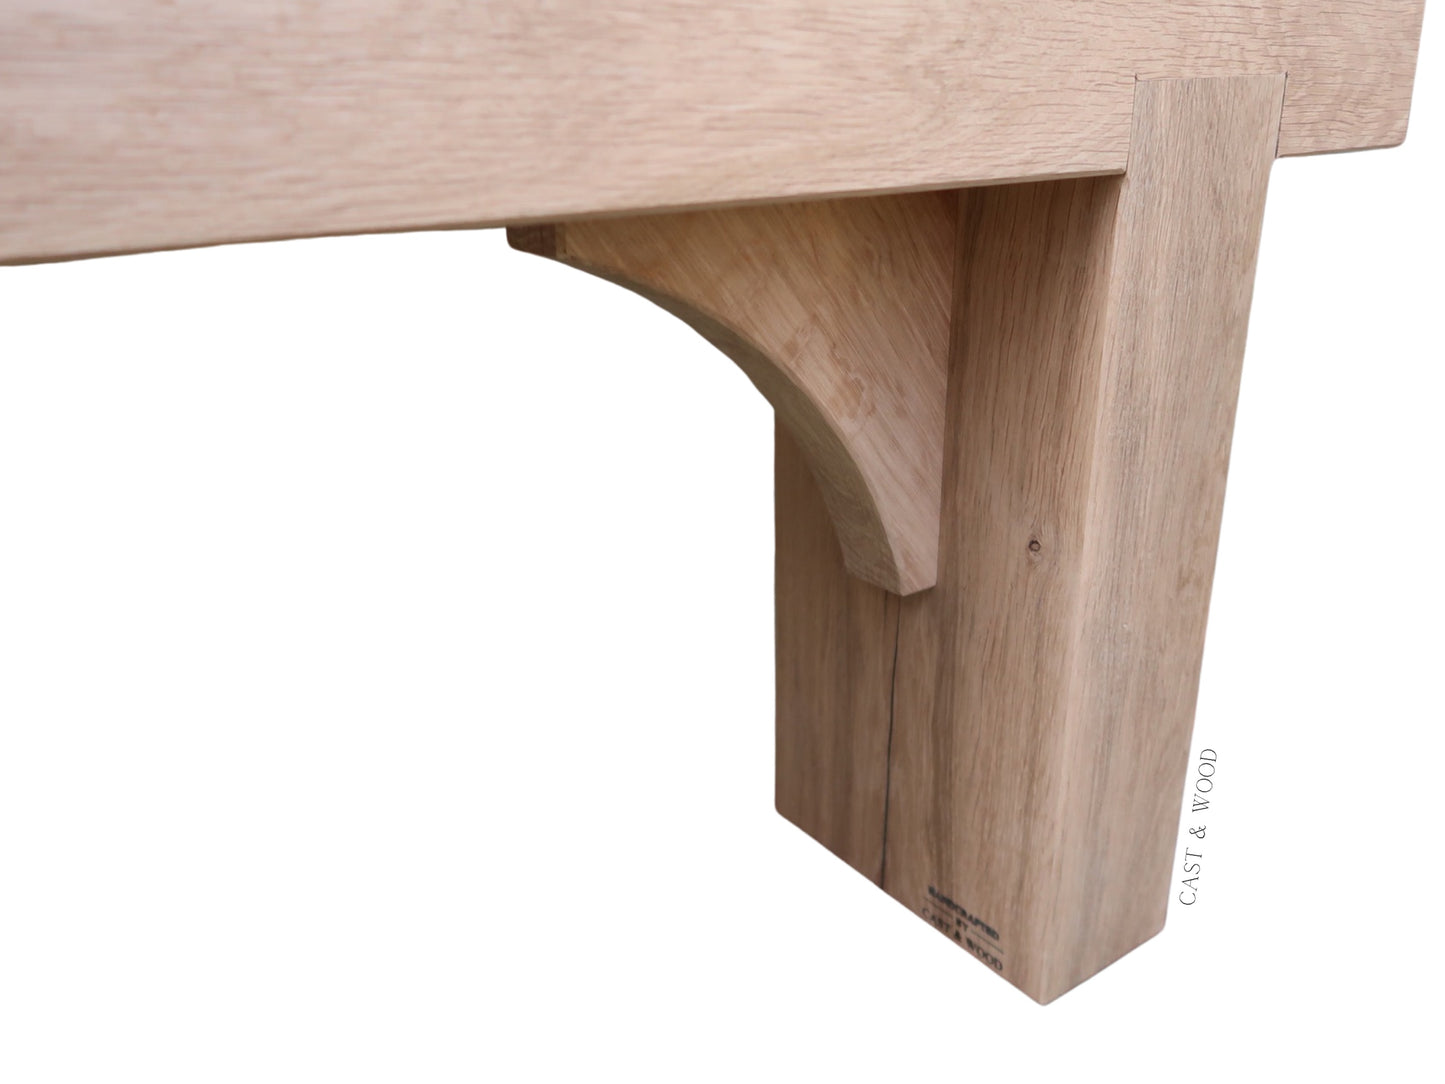 Solid Oak Garden Bench - Local Delivery